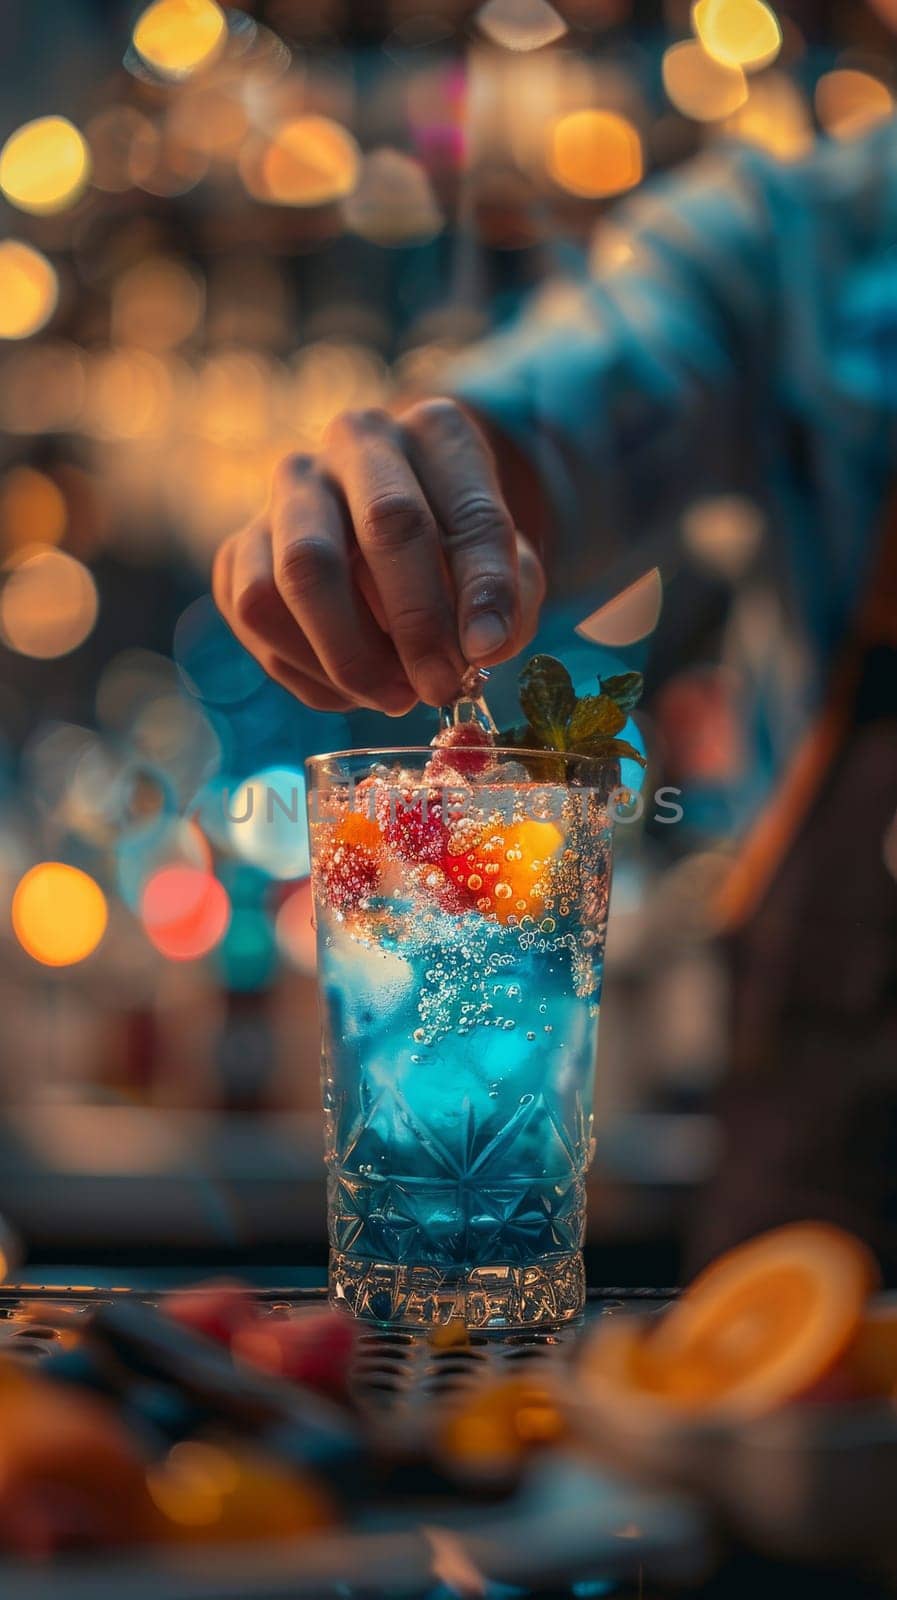 Colorful cocktail glass on glass table in night club restaurant by itchaznong